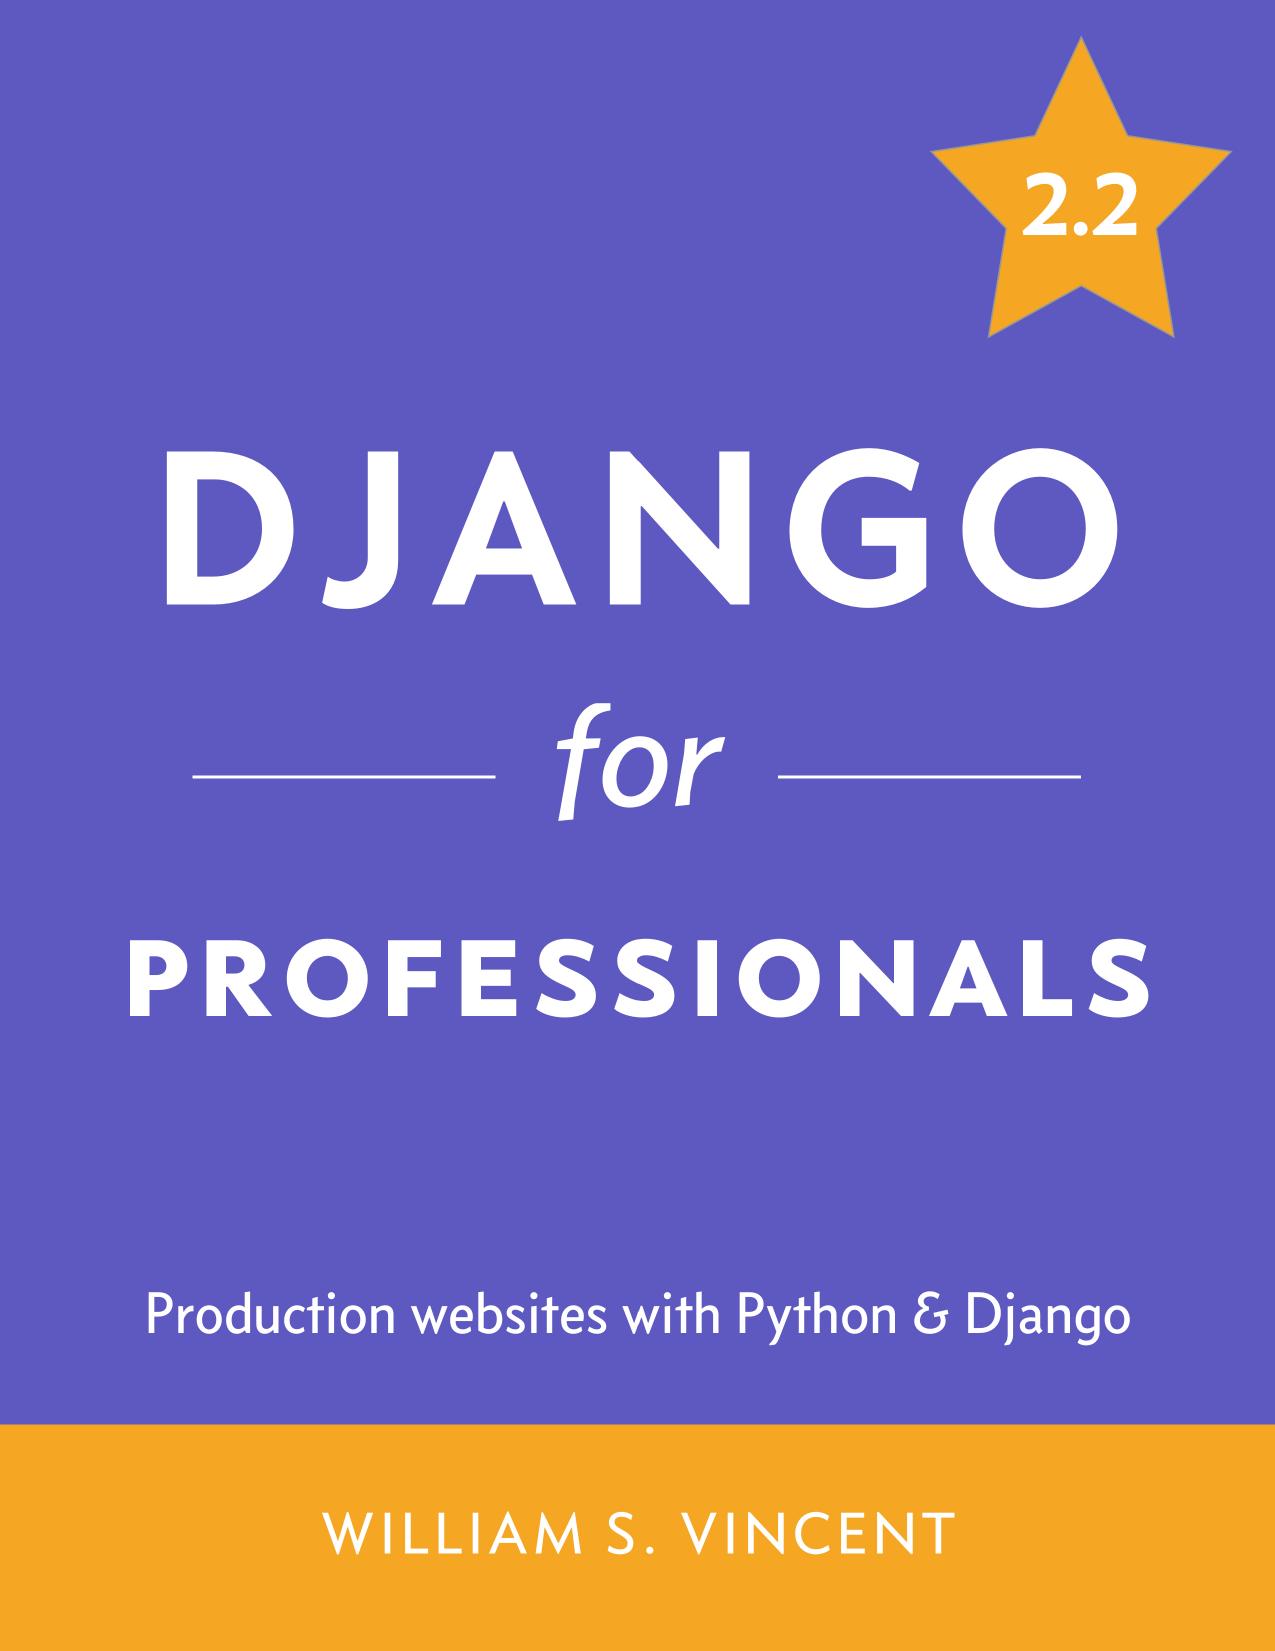 Django for Professionals by William S. Vincent